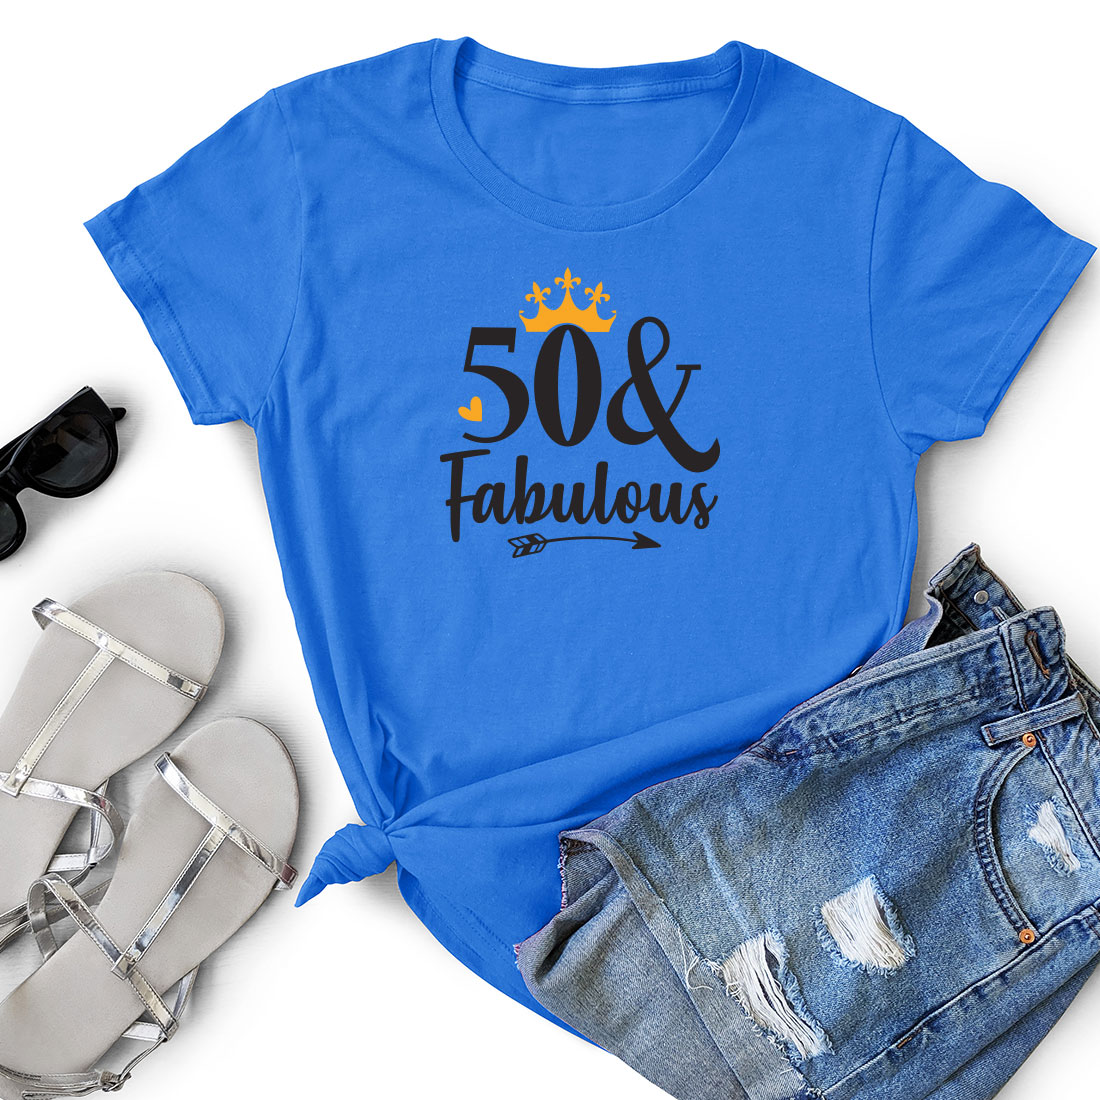 T - shirt that says 50 and fabulous next to a pair of shorts.